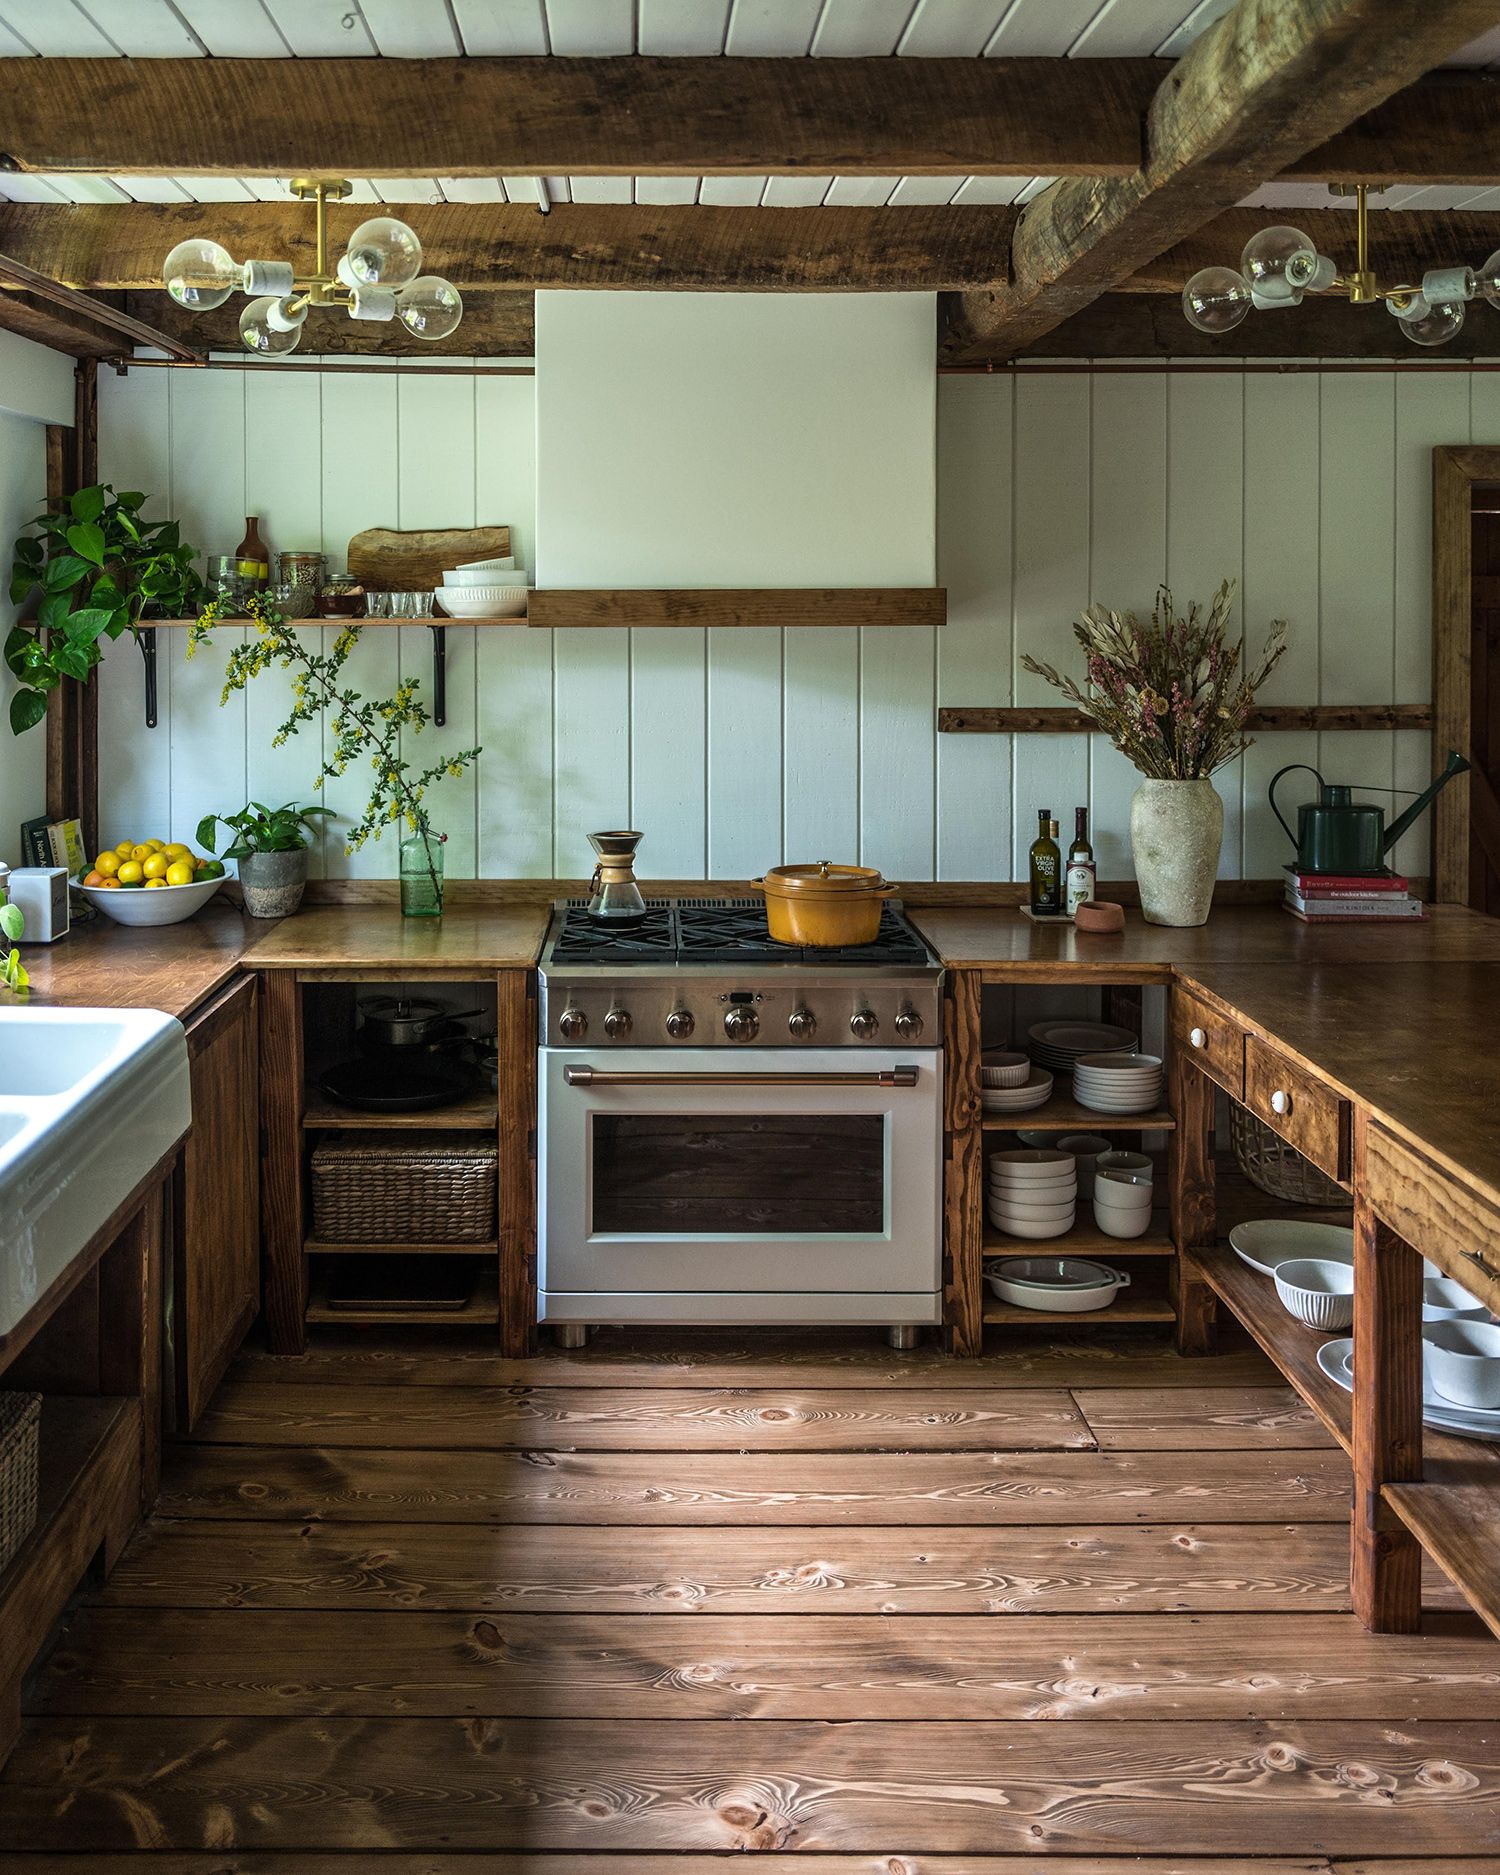 Ideas to design a rustic kitchen